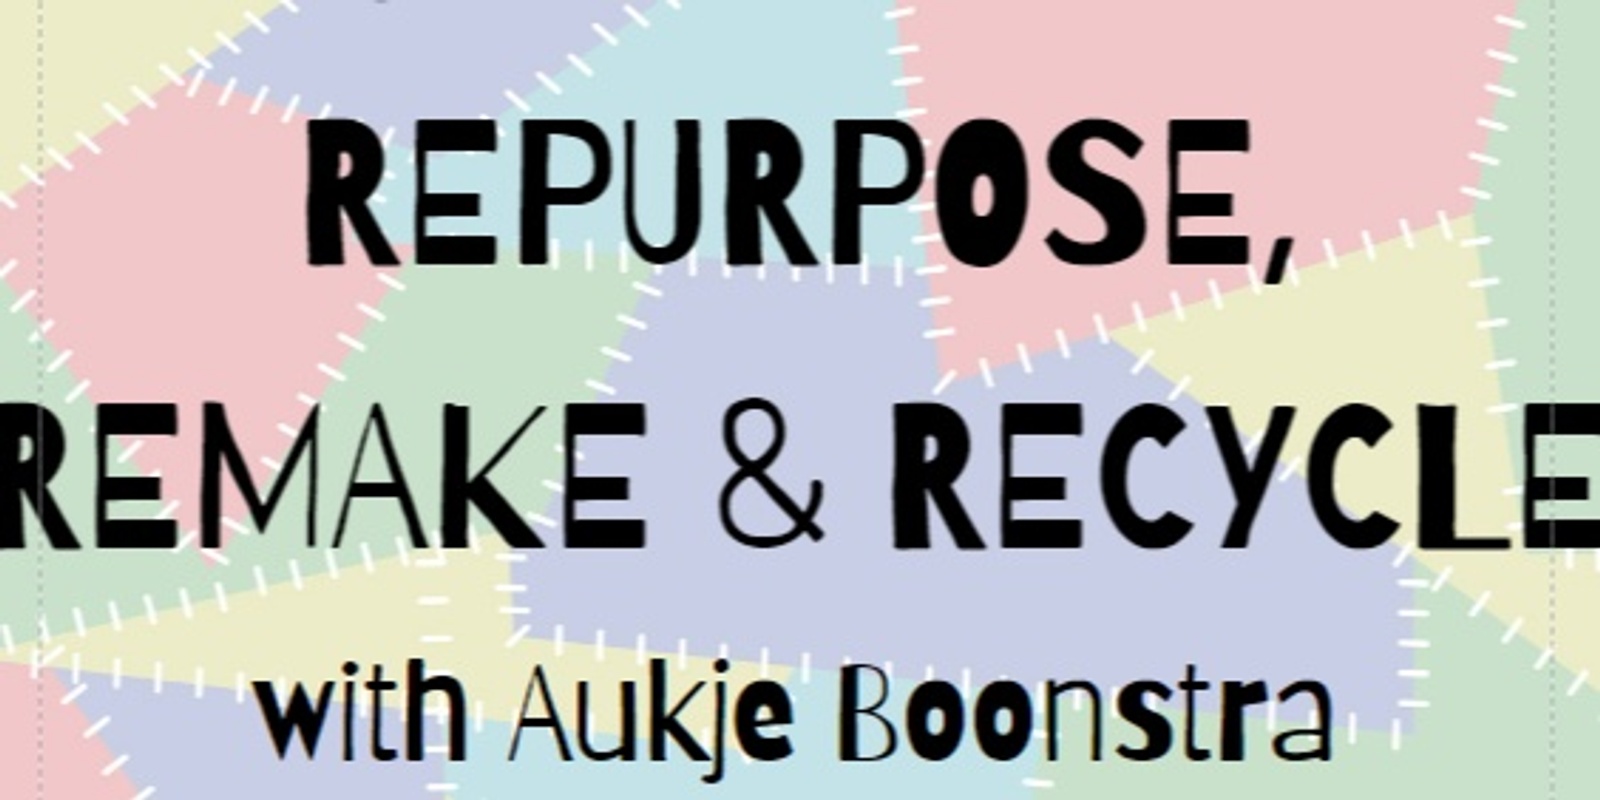 Banner image for Repurpose, Remake & Recycle weekend Workshop with Aukje Boonstra 